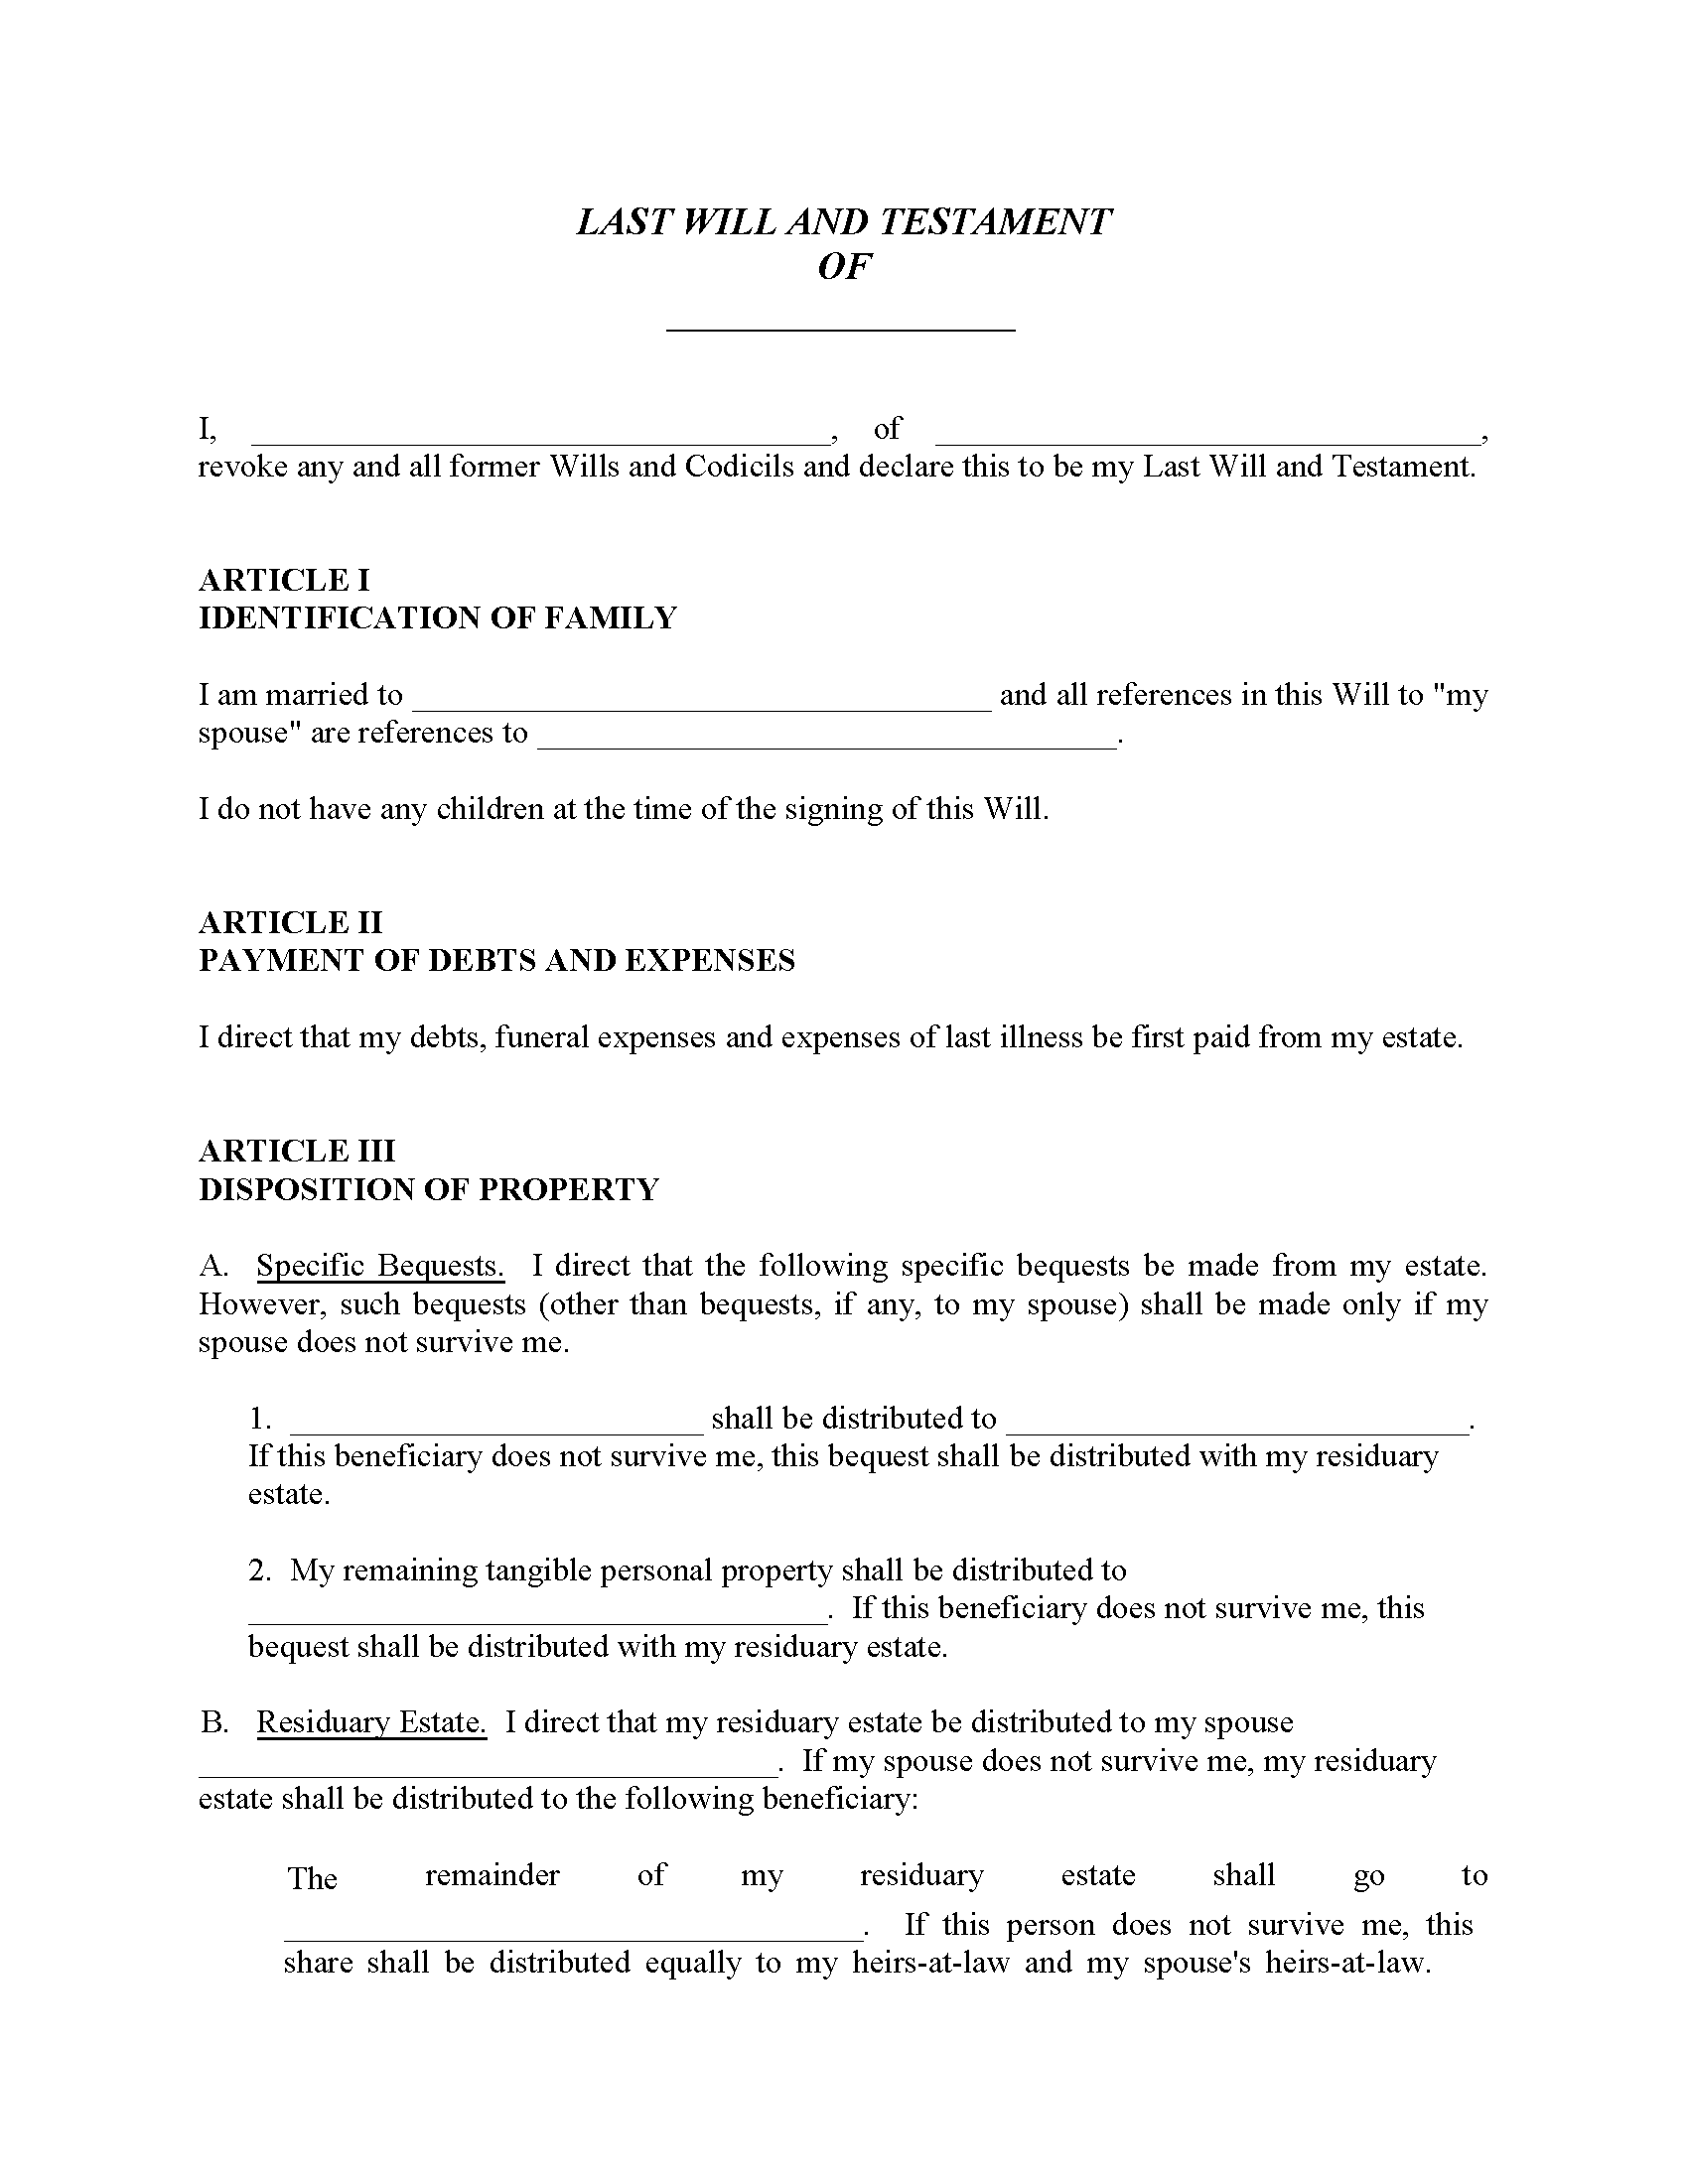 north-carolina-will-for-married-with-no-children-fillable-pdf-free